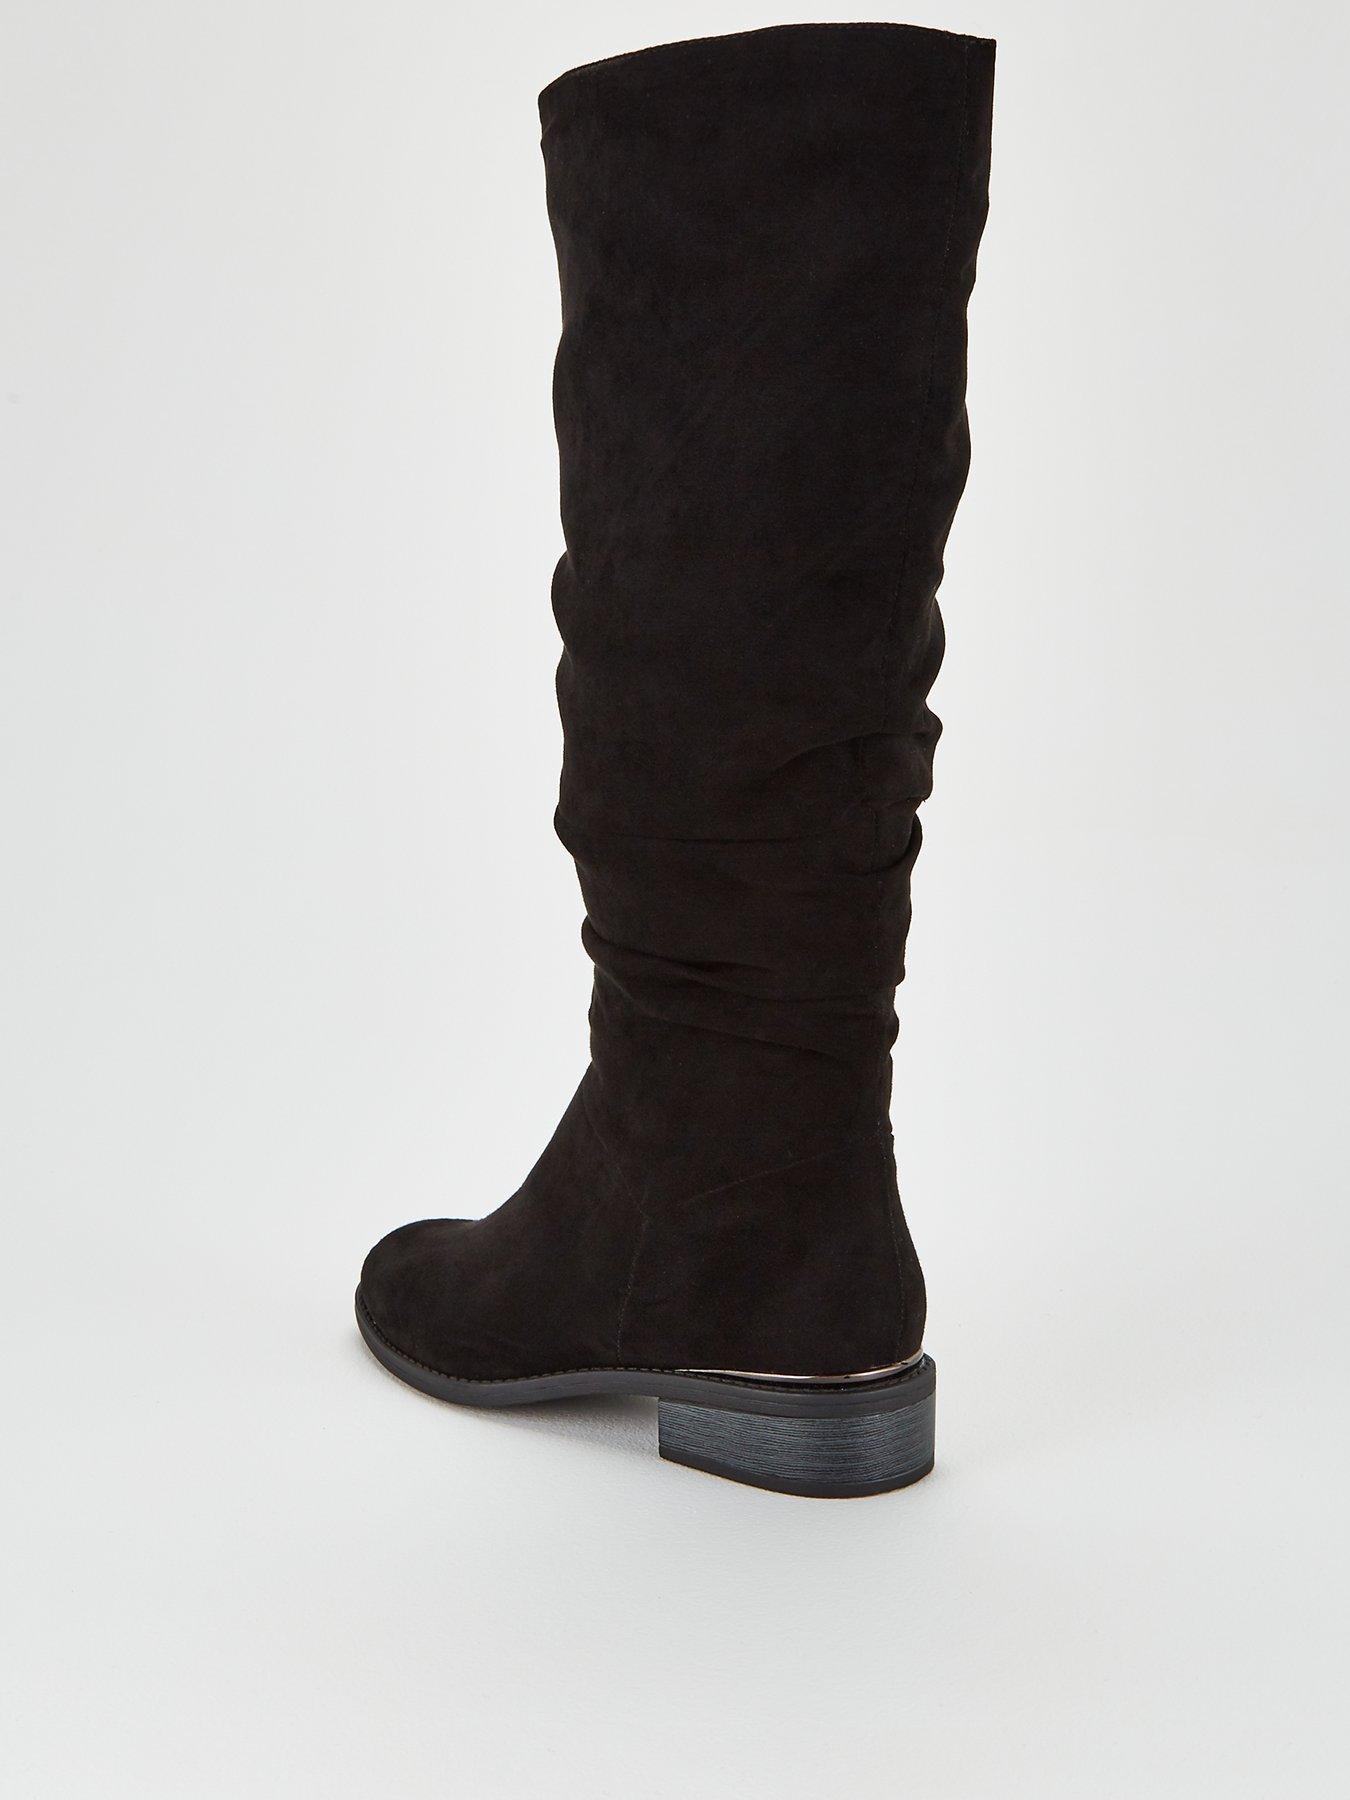 black suede knee high boots flat